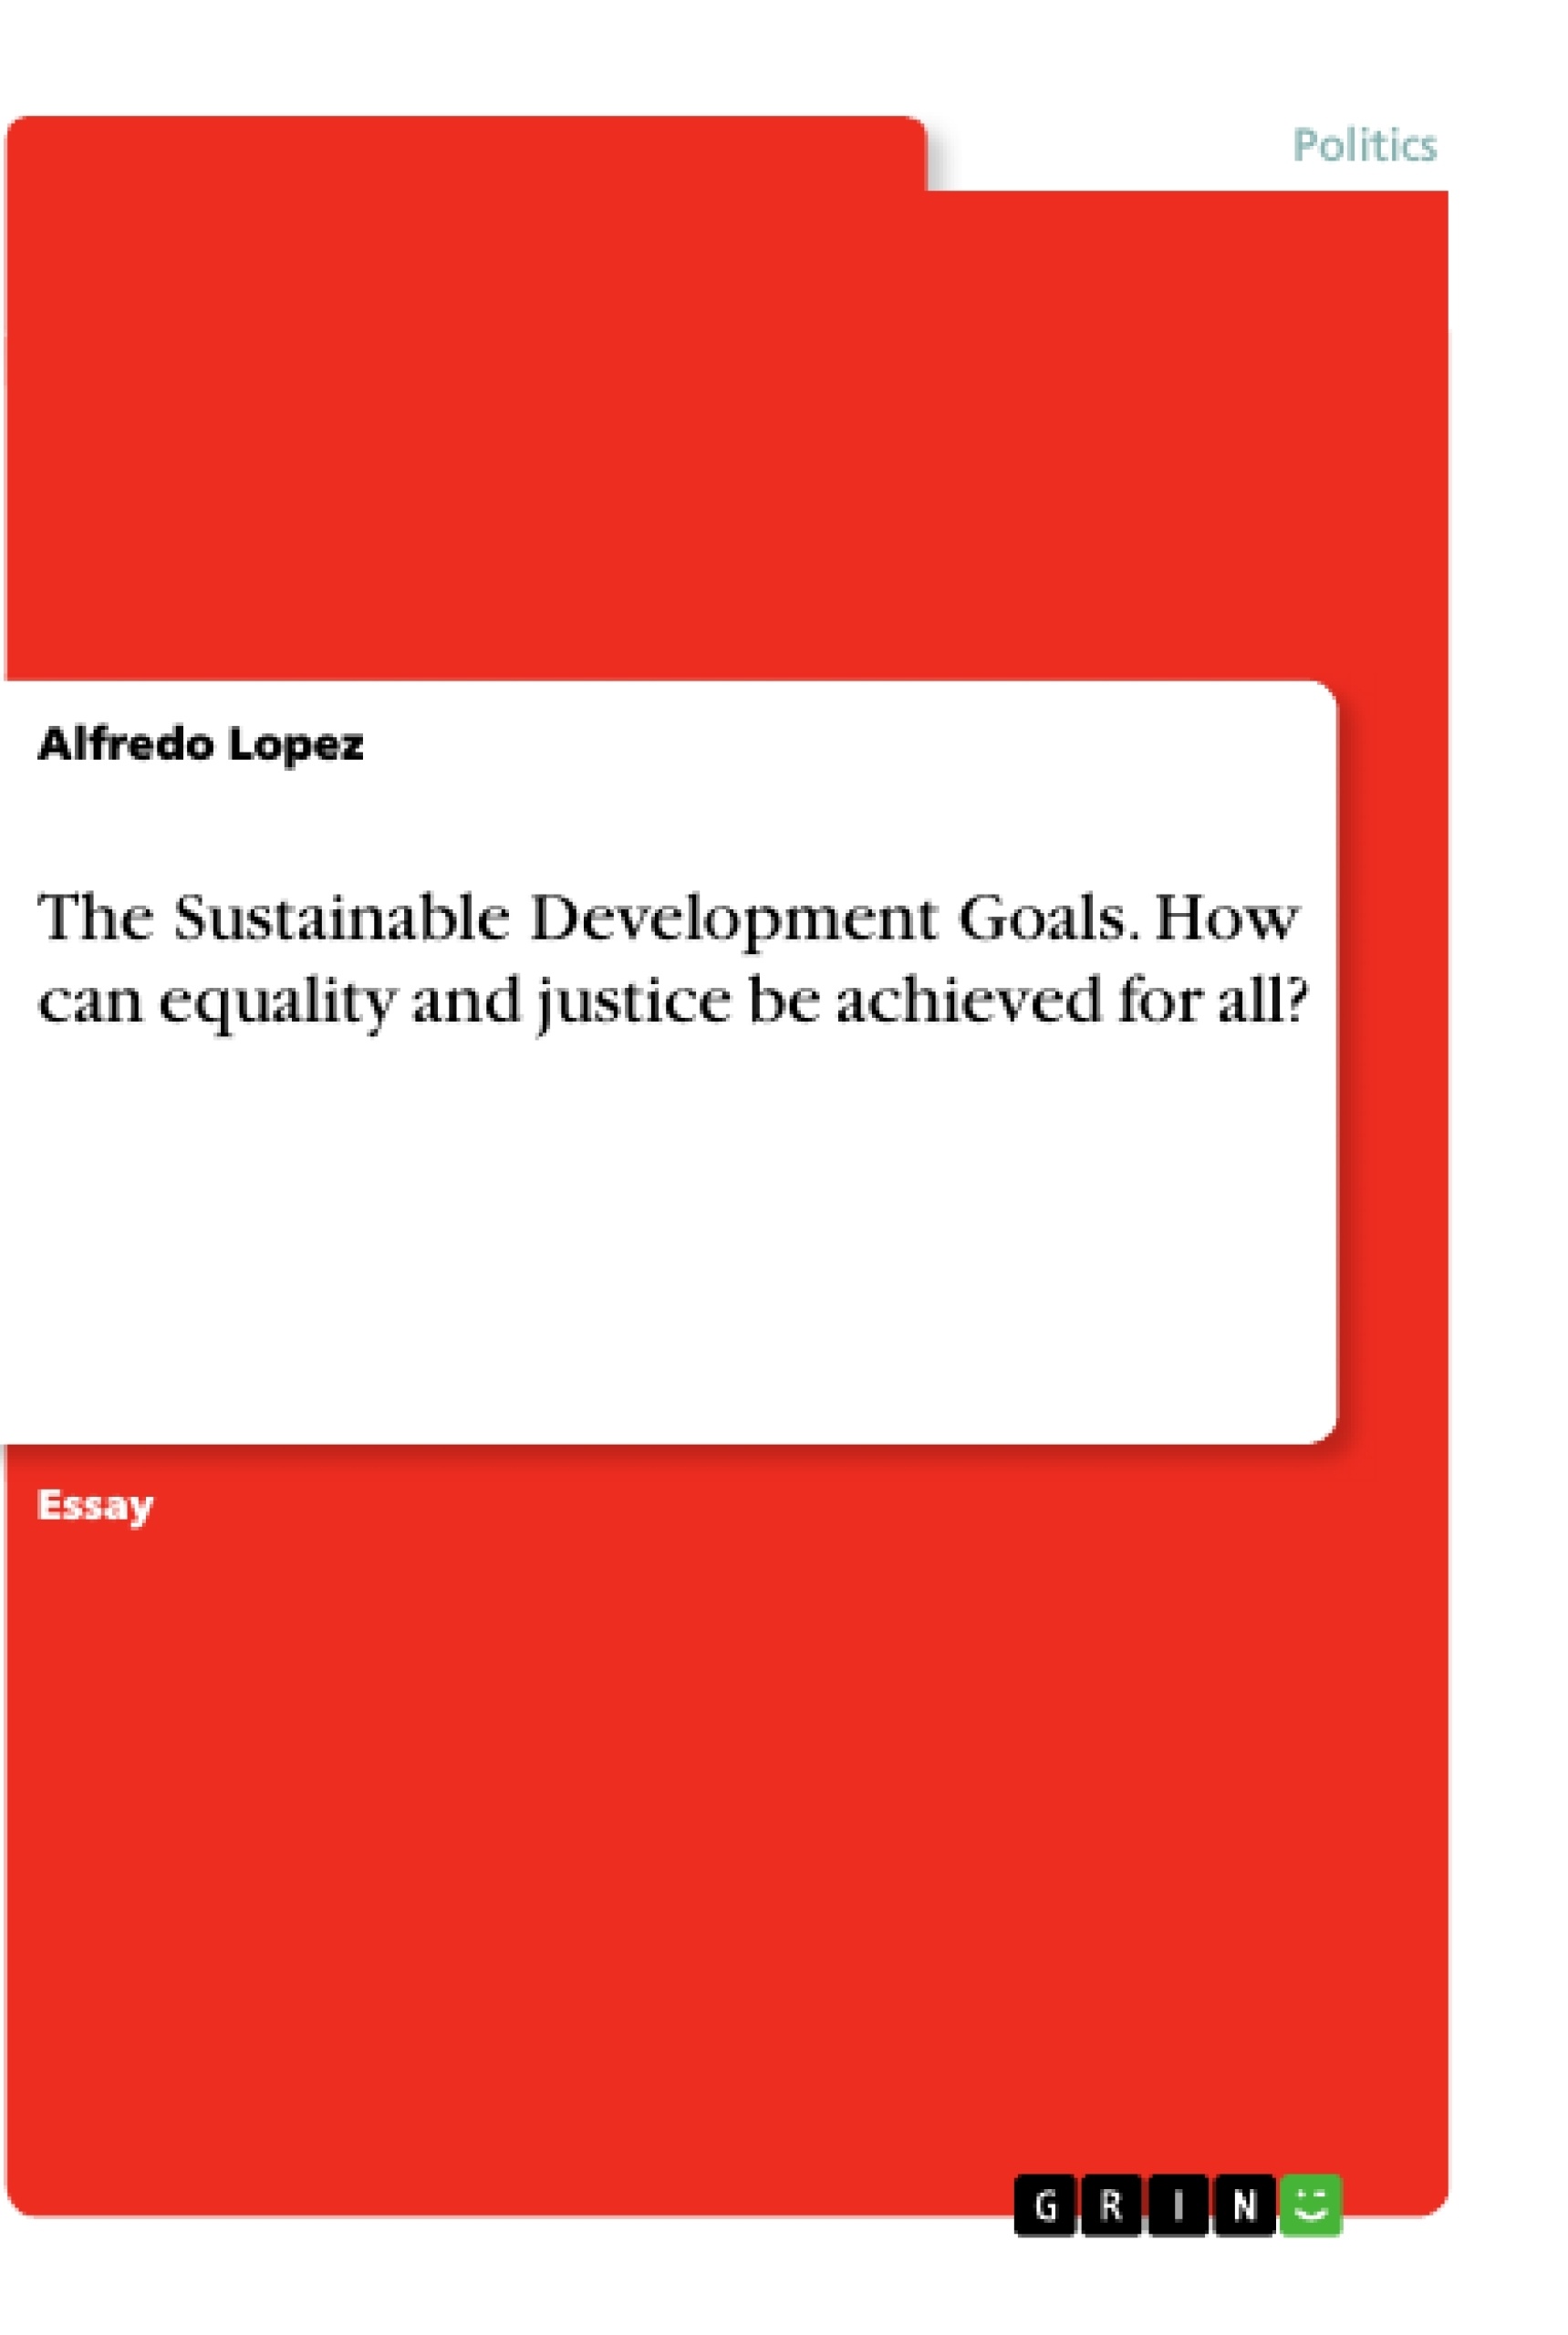 Titre: The Sustainable Development Goals. How can equality and justice be achieved for all?